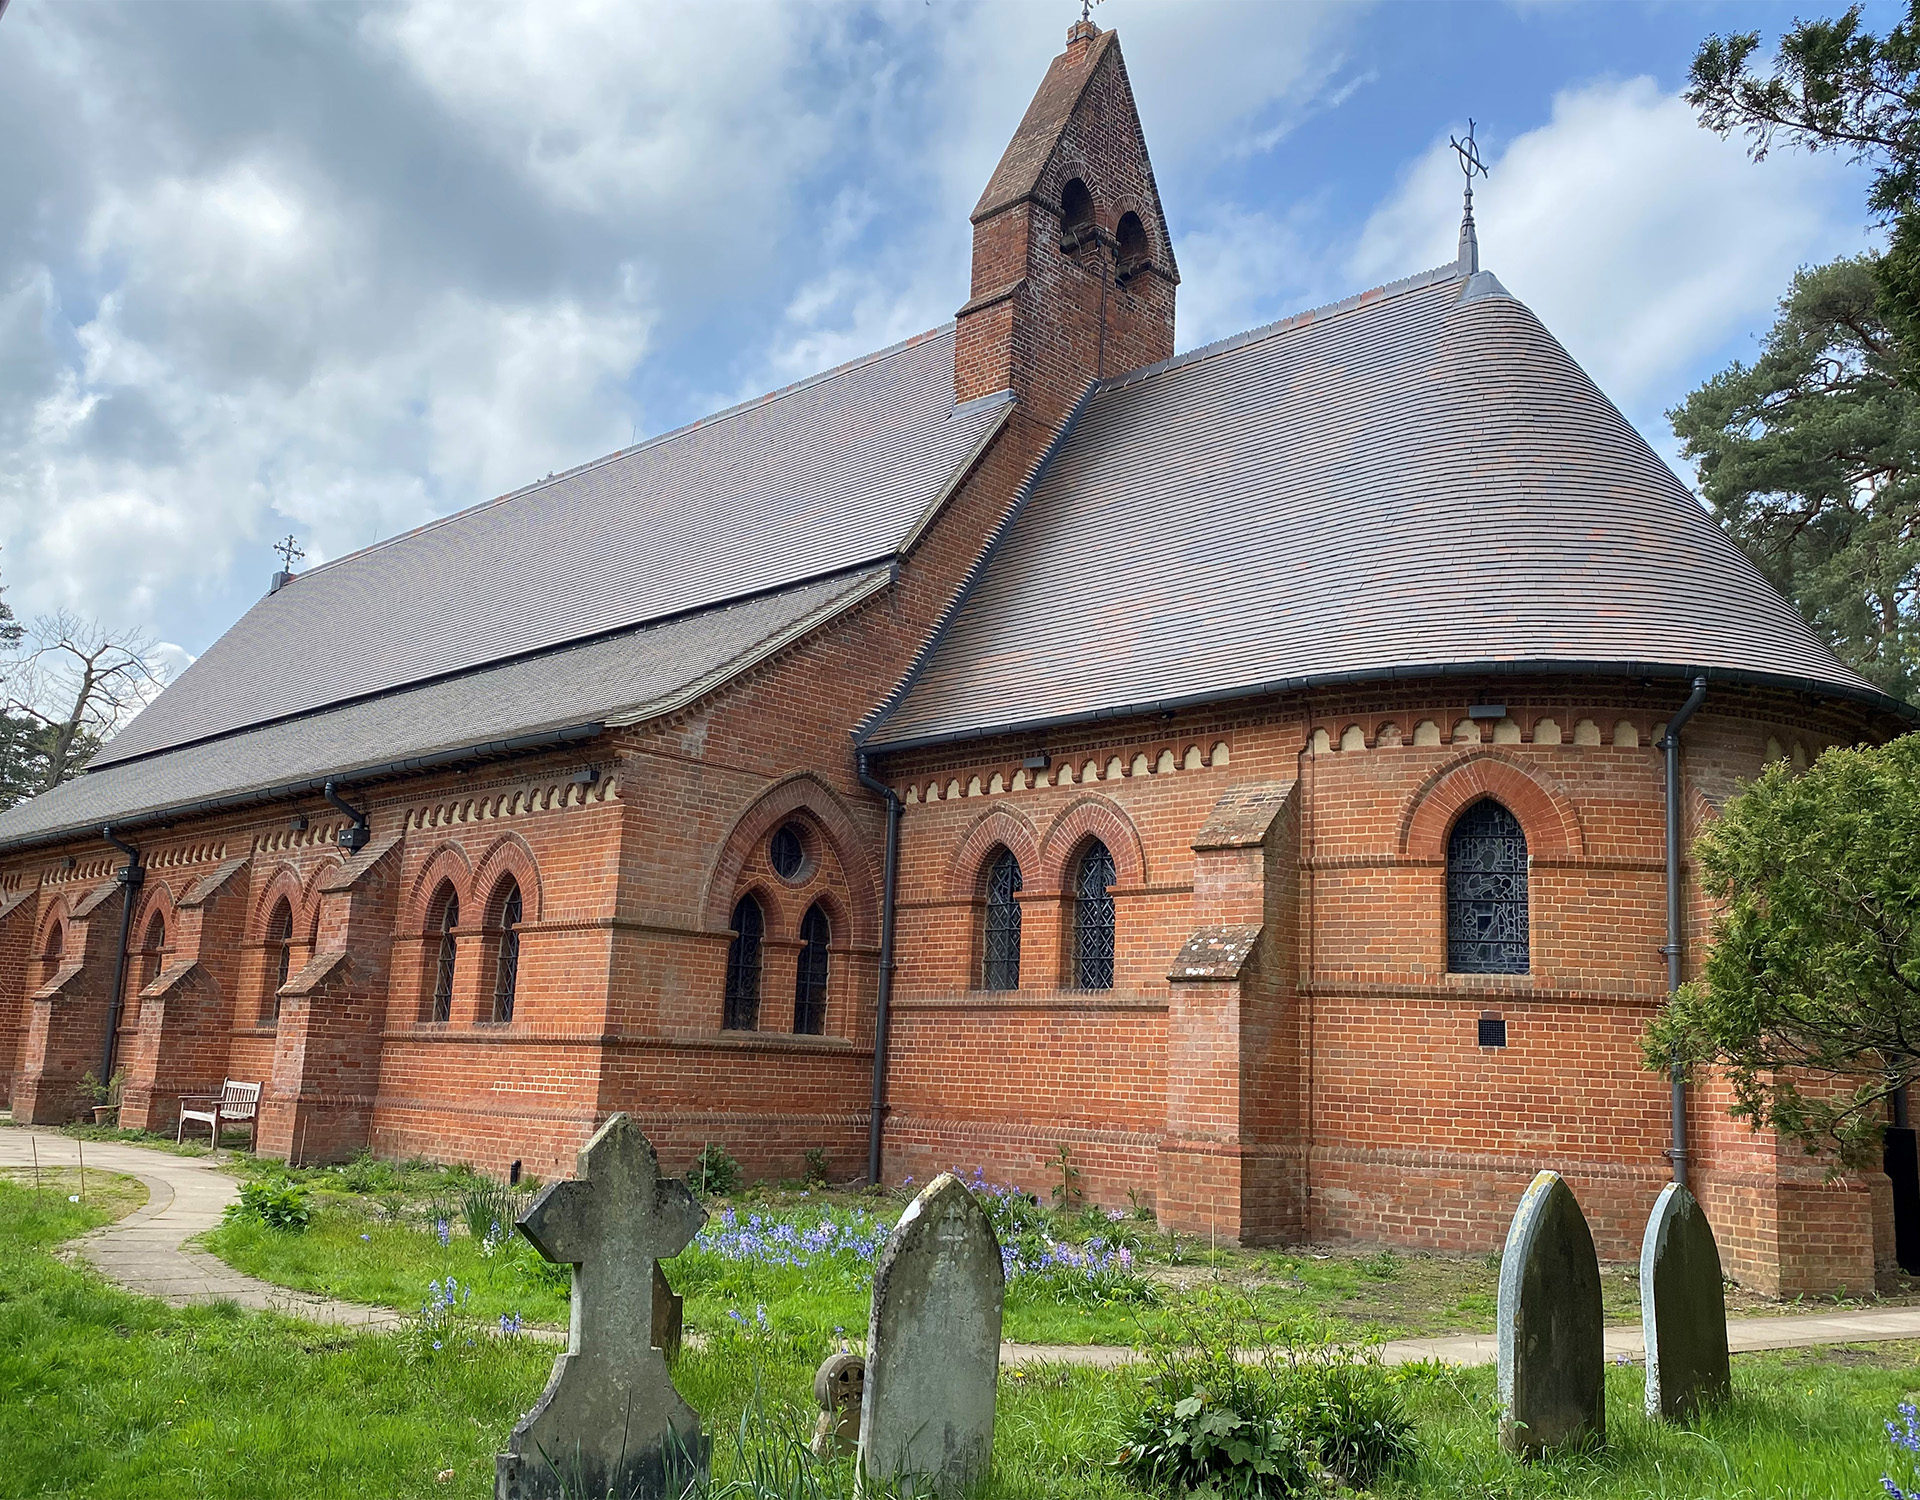 All Saints Church Fleet was reroofed using Dreadnought brown brindle tiles after a devastating fire